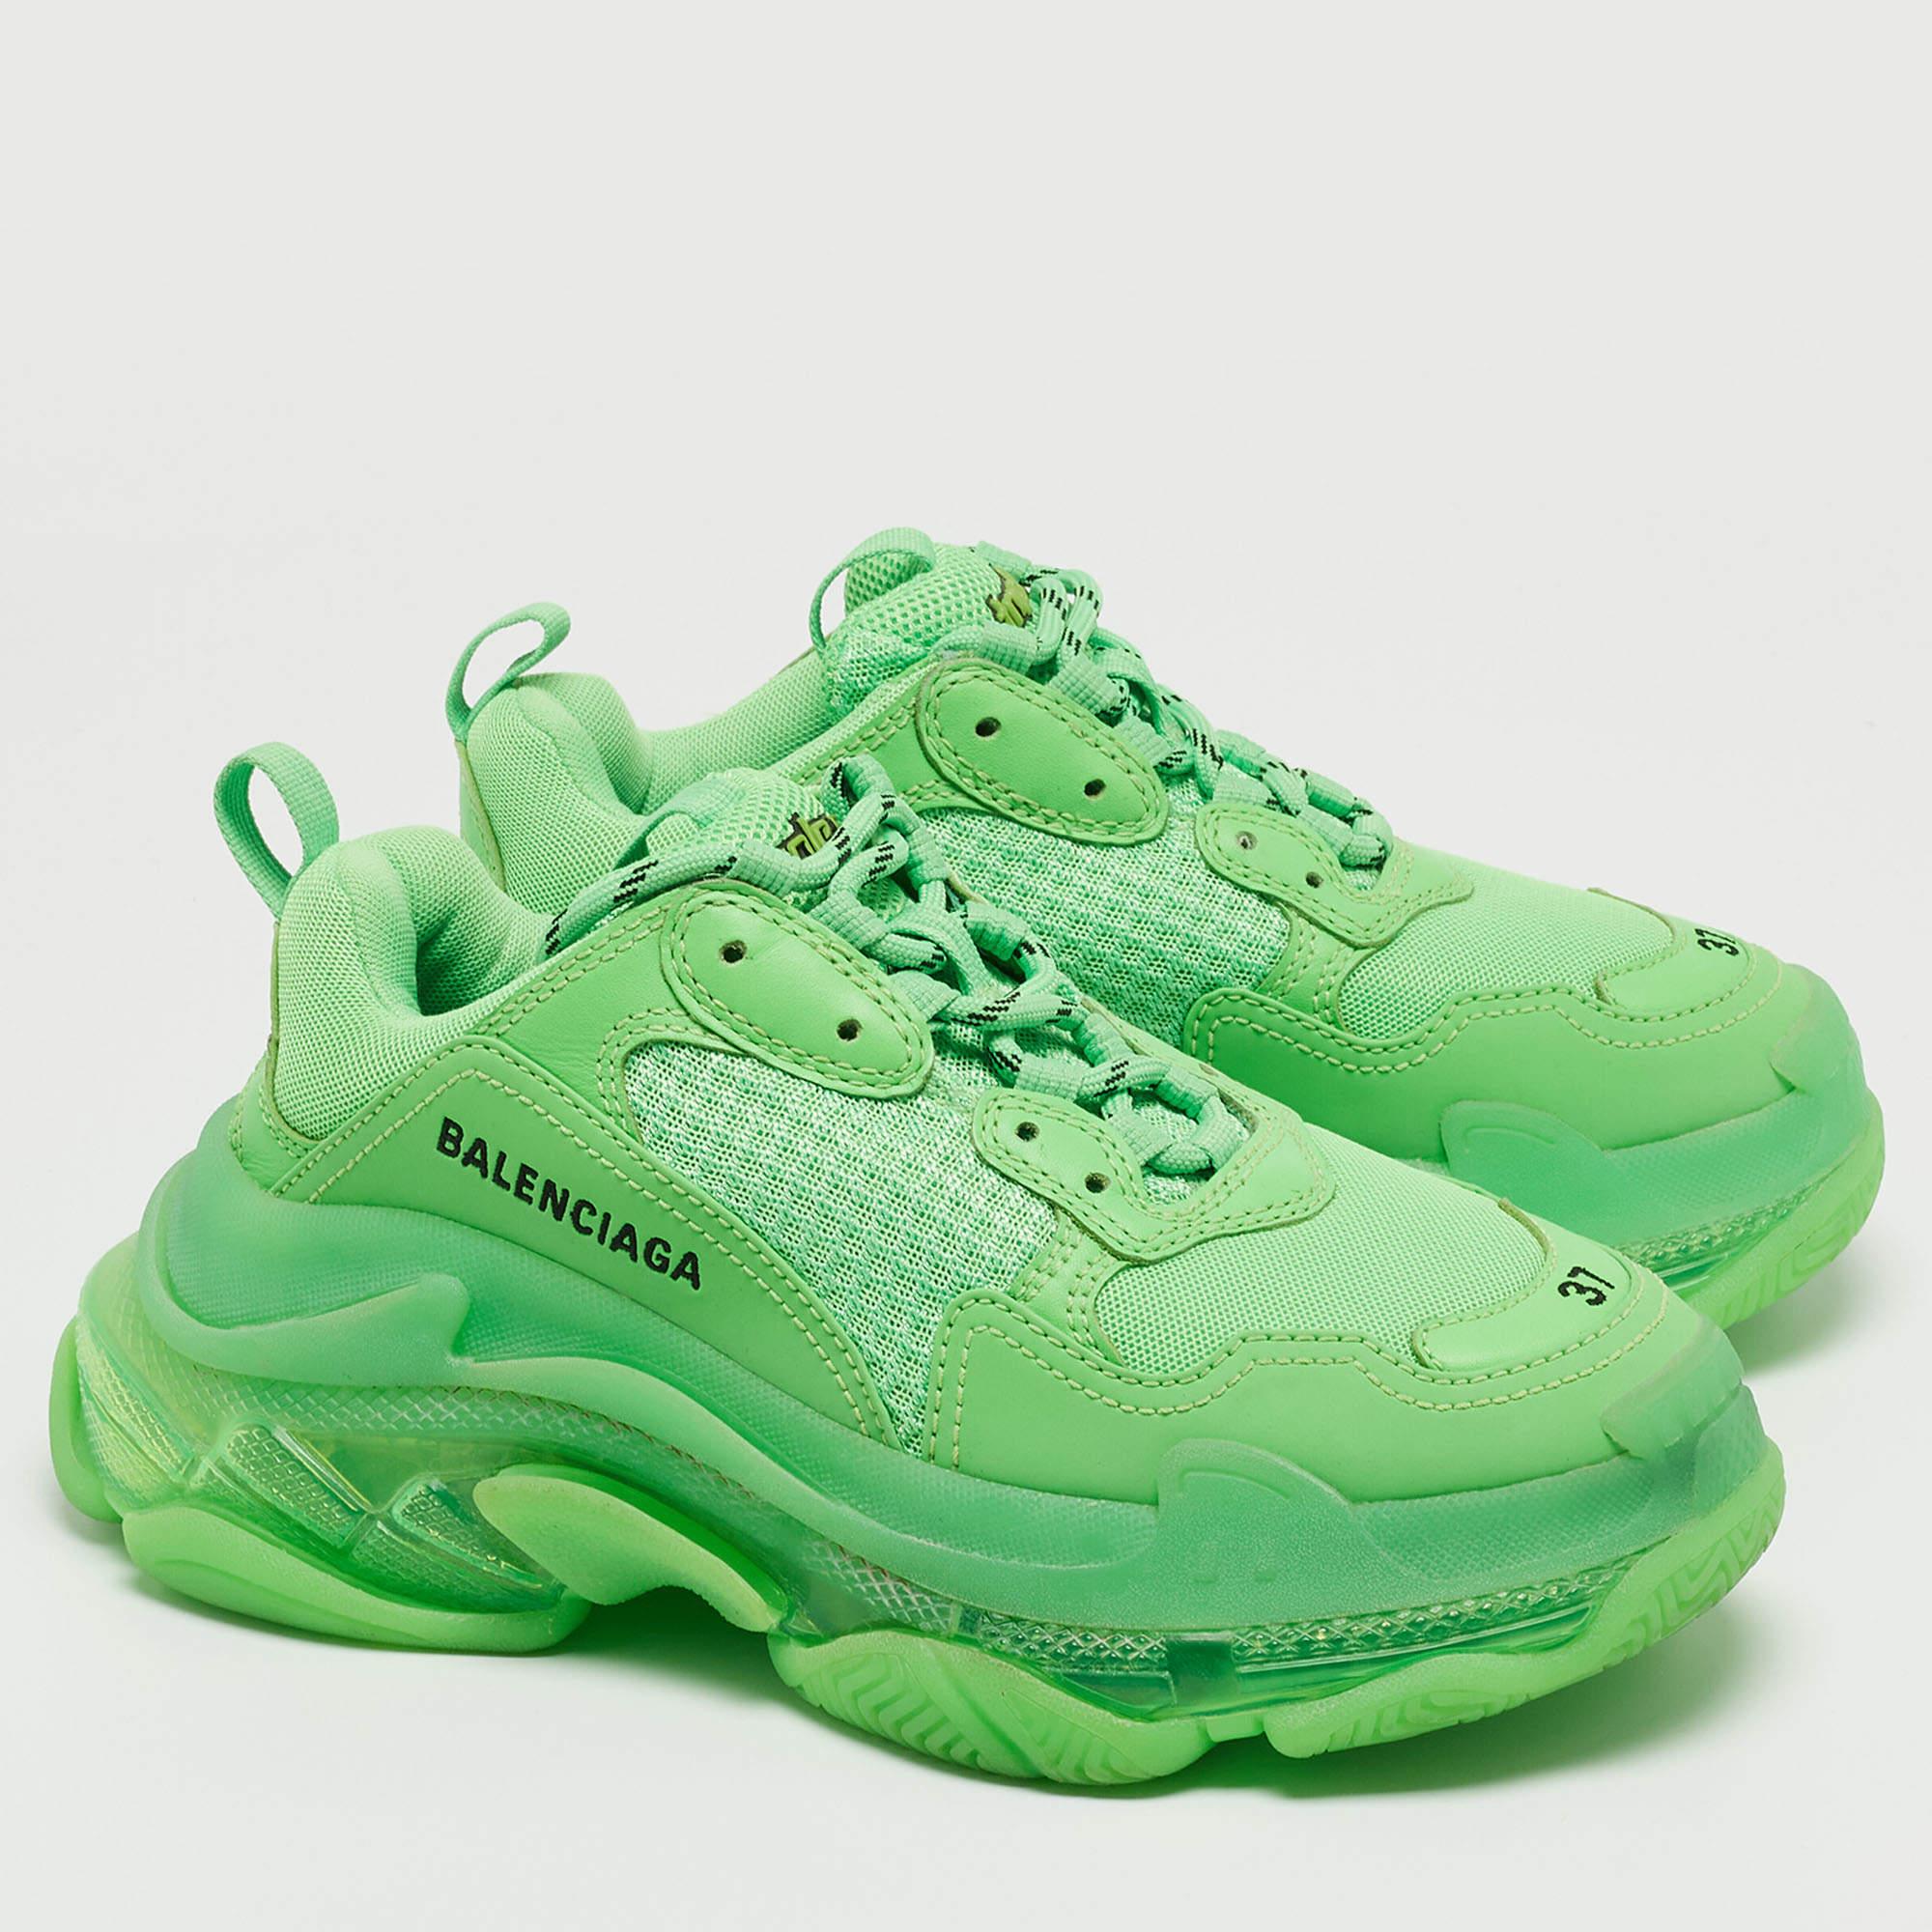 Men's Balenciaga Green Mesh and Leather Triple S Low Top Sneakers 